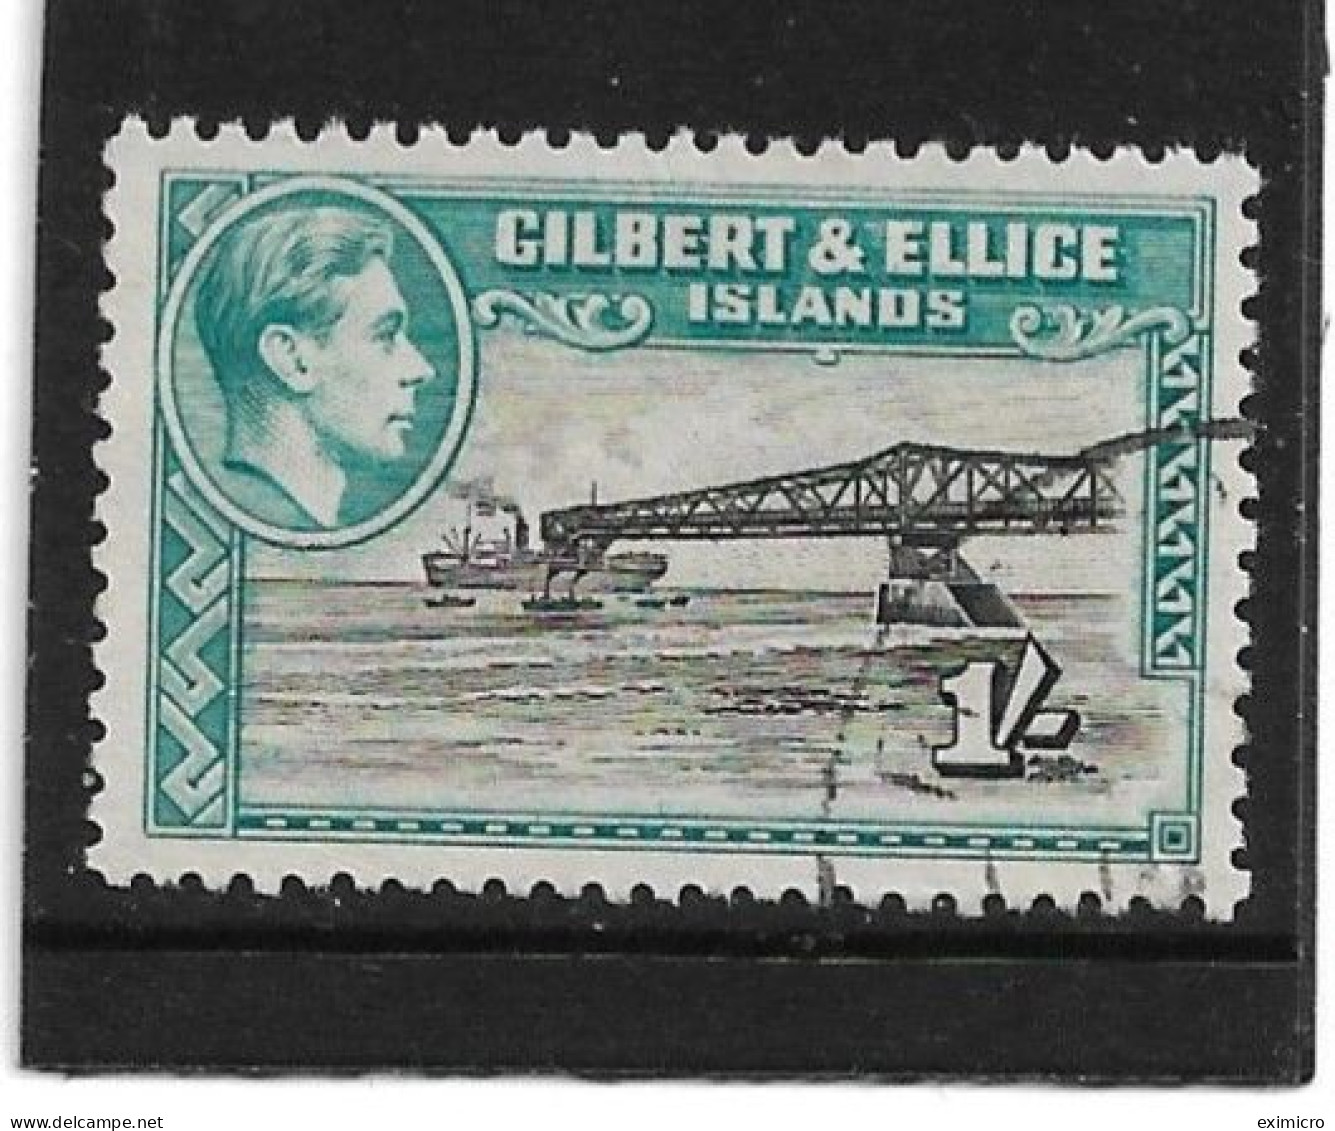 GILBERT & ELLICE ISLANDS 1943 1s BROWNISH-BLACK AND TURQUOISE-BLUE SG 51a FINE USED Cat £7.50 - Gilbert- Und Ellice-Inseln (...-1979)